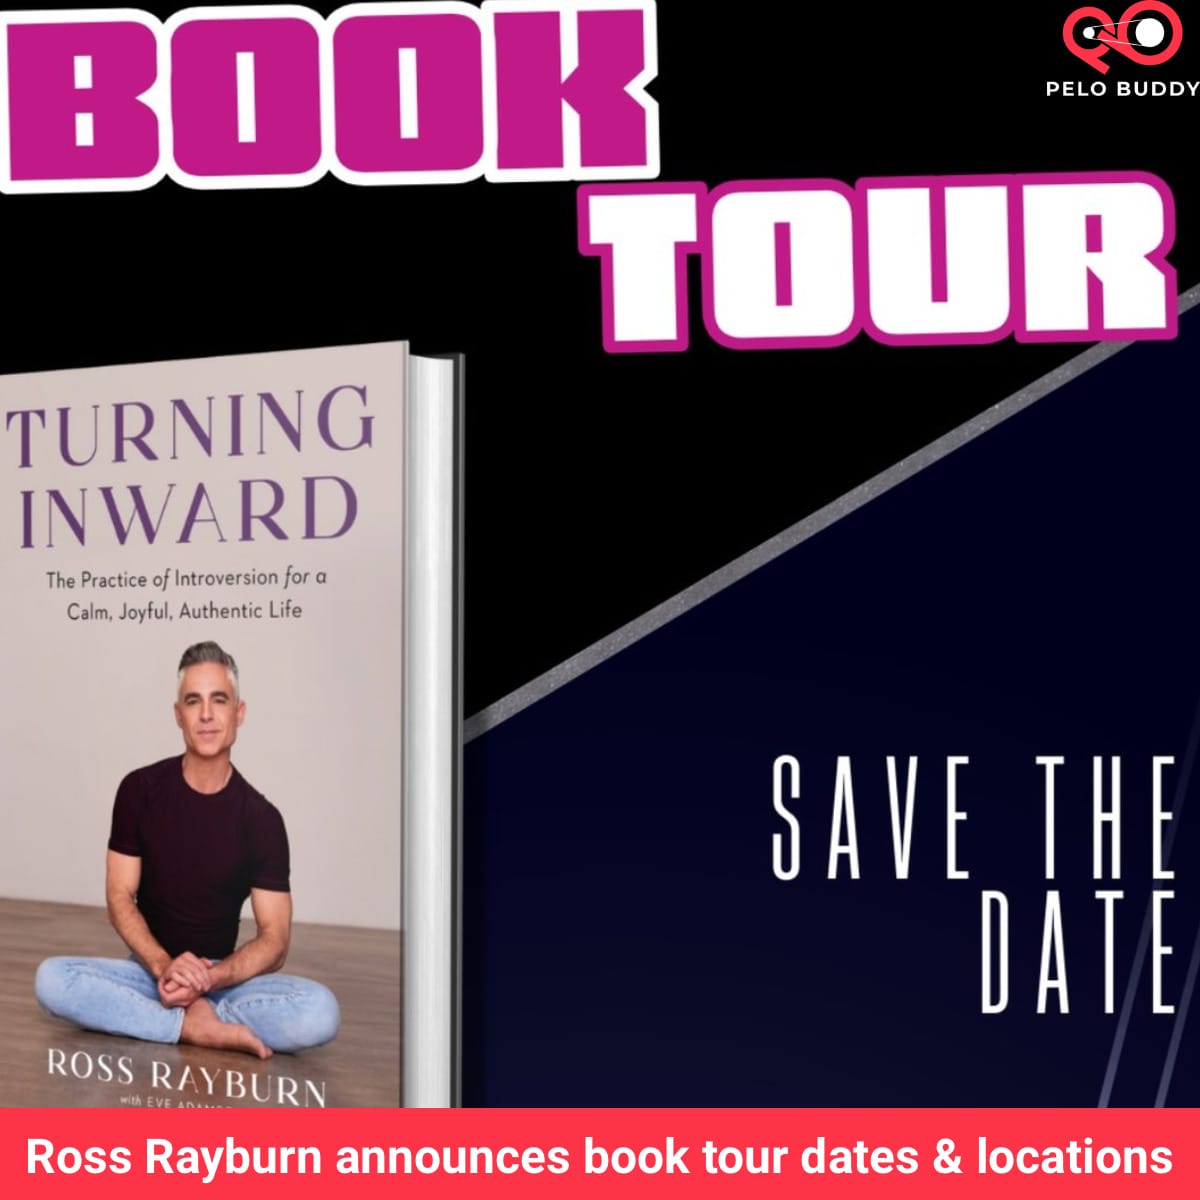 Peloton Instructor Ross Rayburn announces book tour dates & locations for  Turning Inward - Peloton Buddy